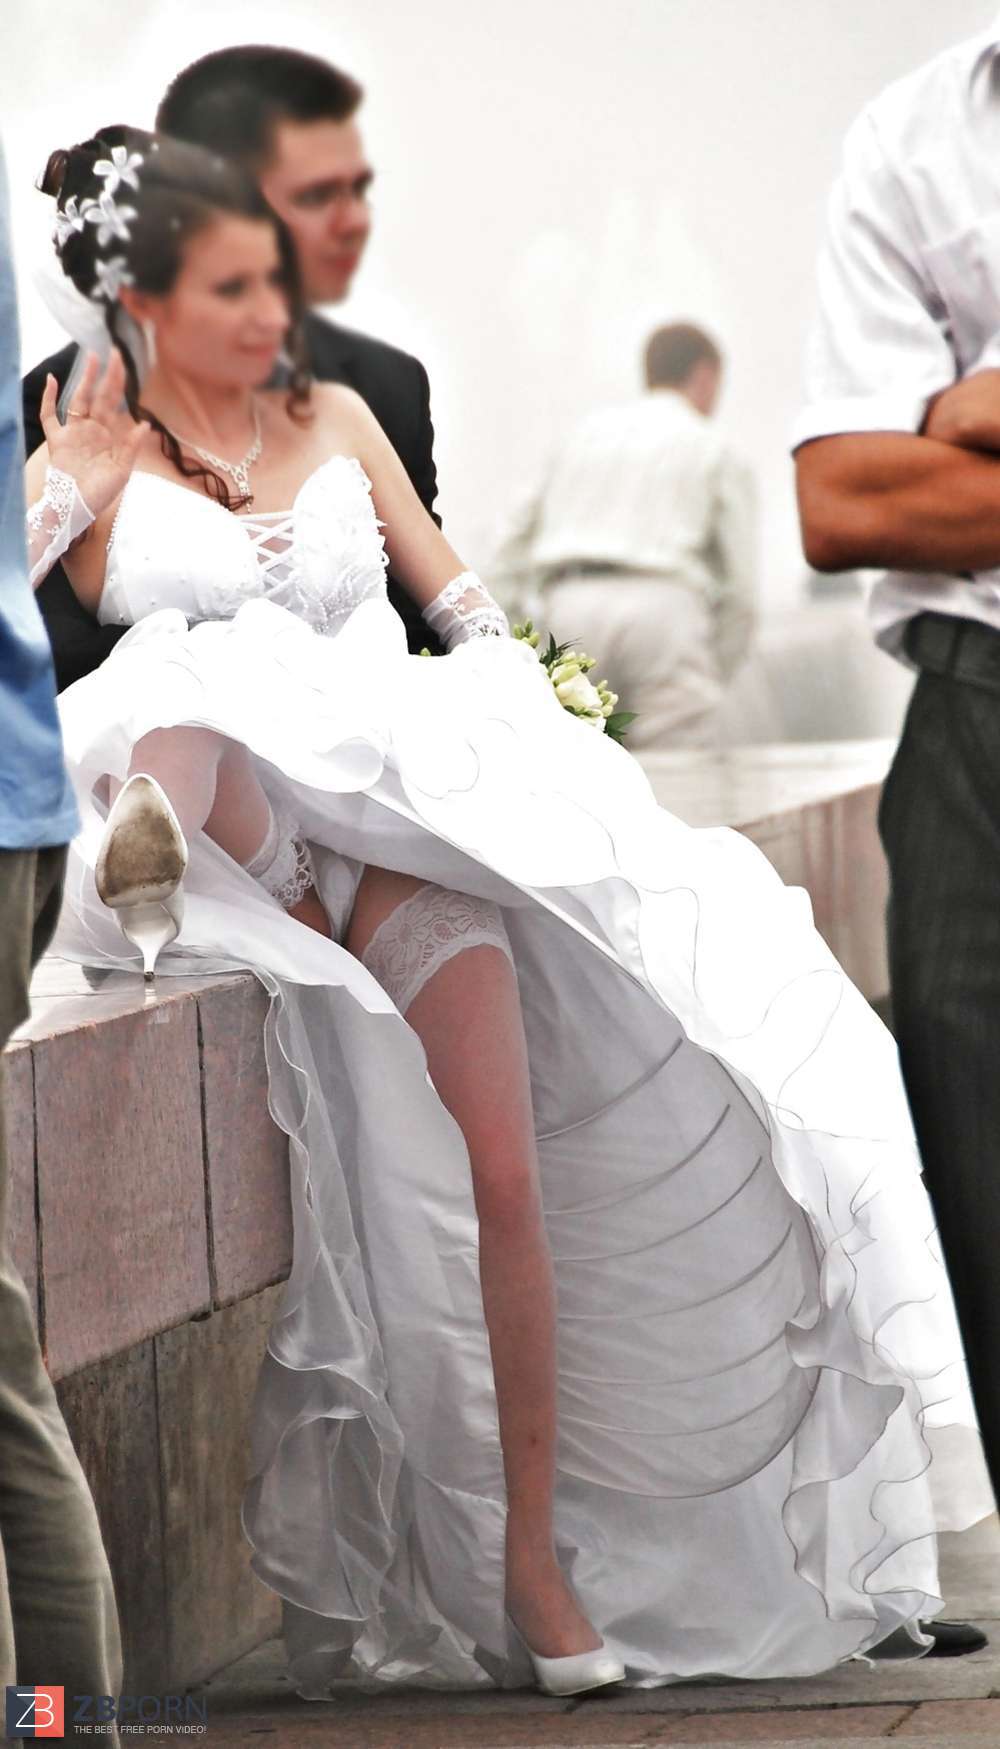 Bride upskirt fotos  picture pic image